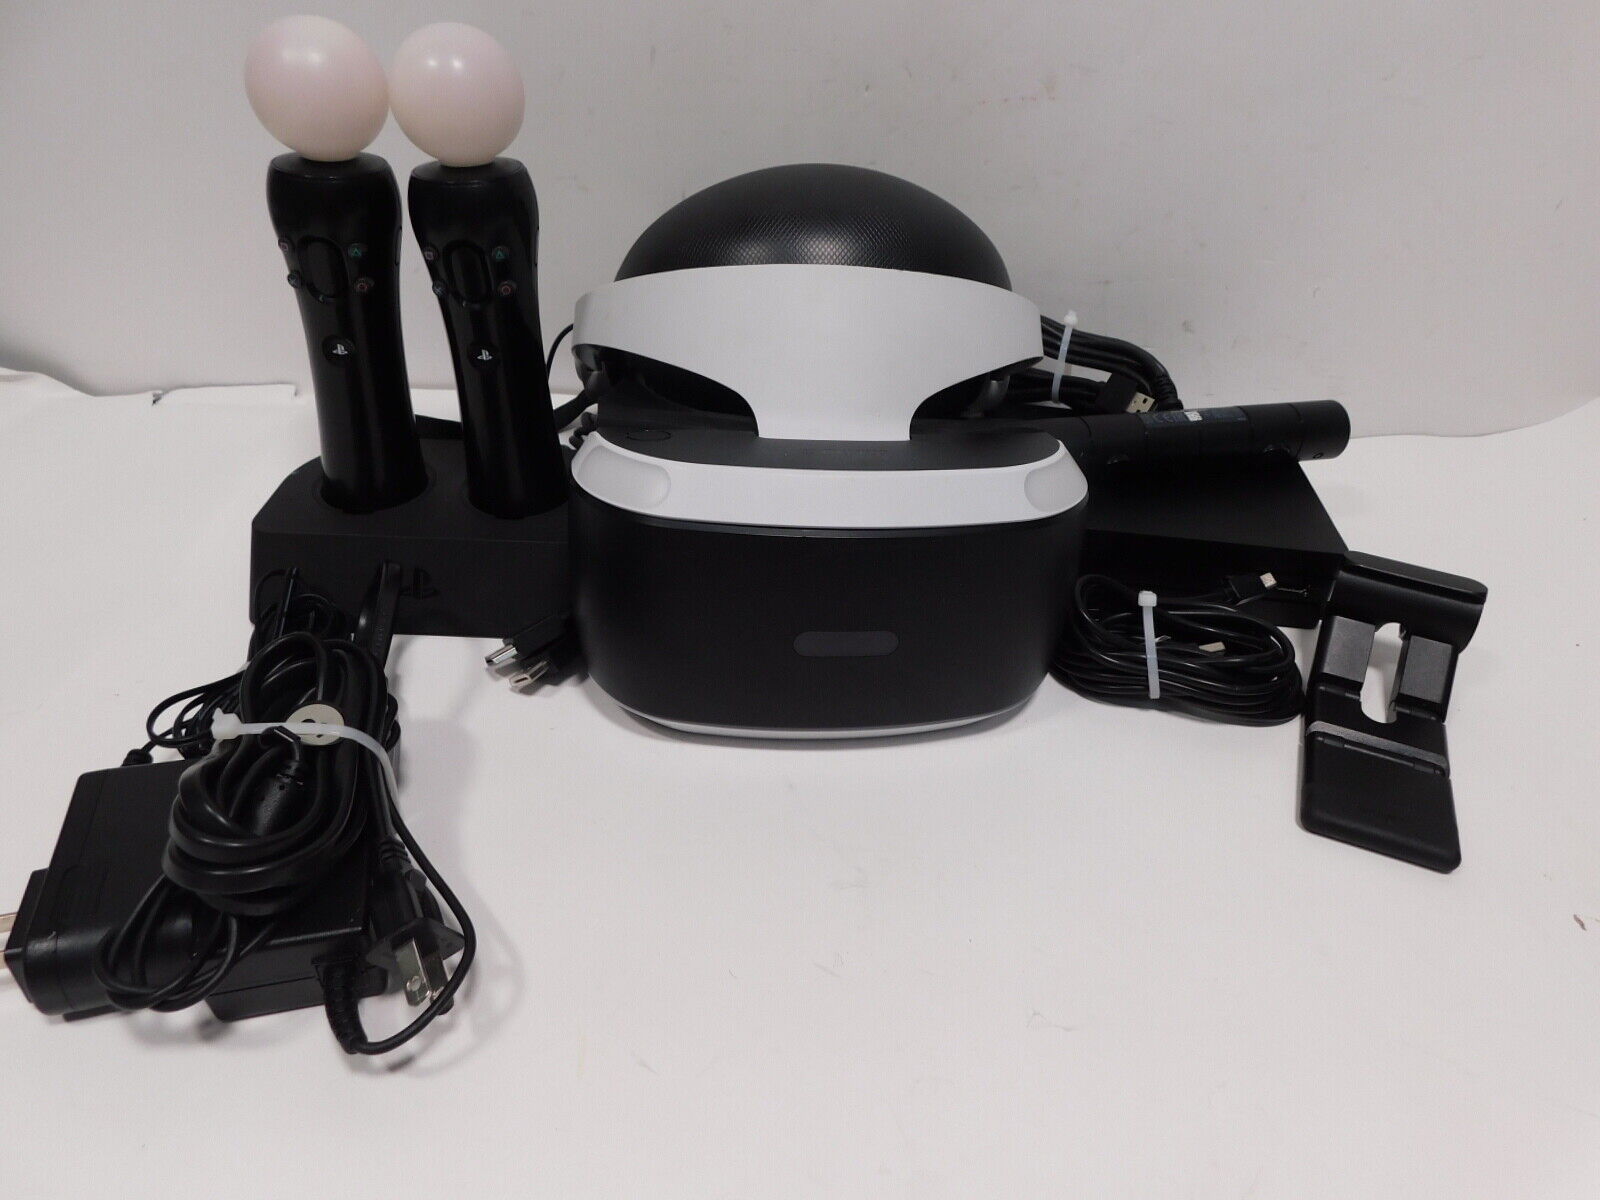 Sony Cuh-zvr2 Playstation Vr Headset